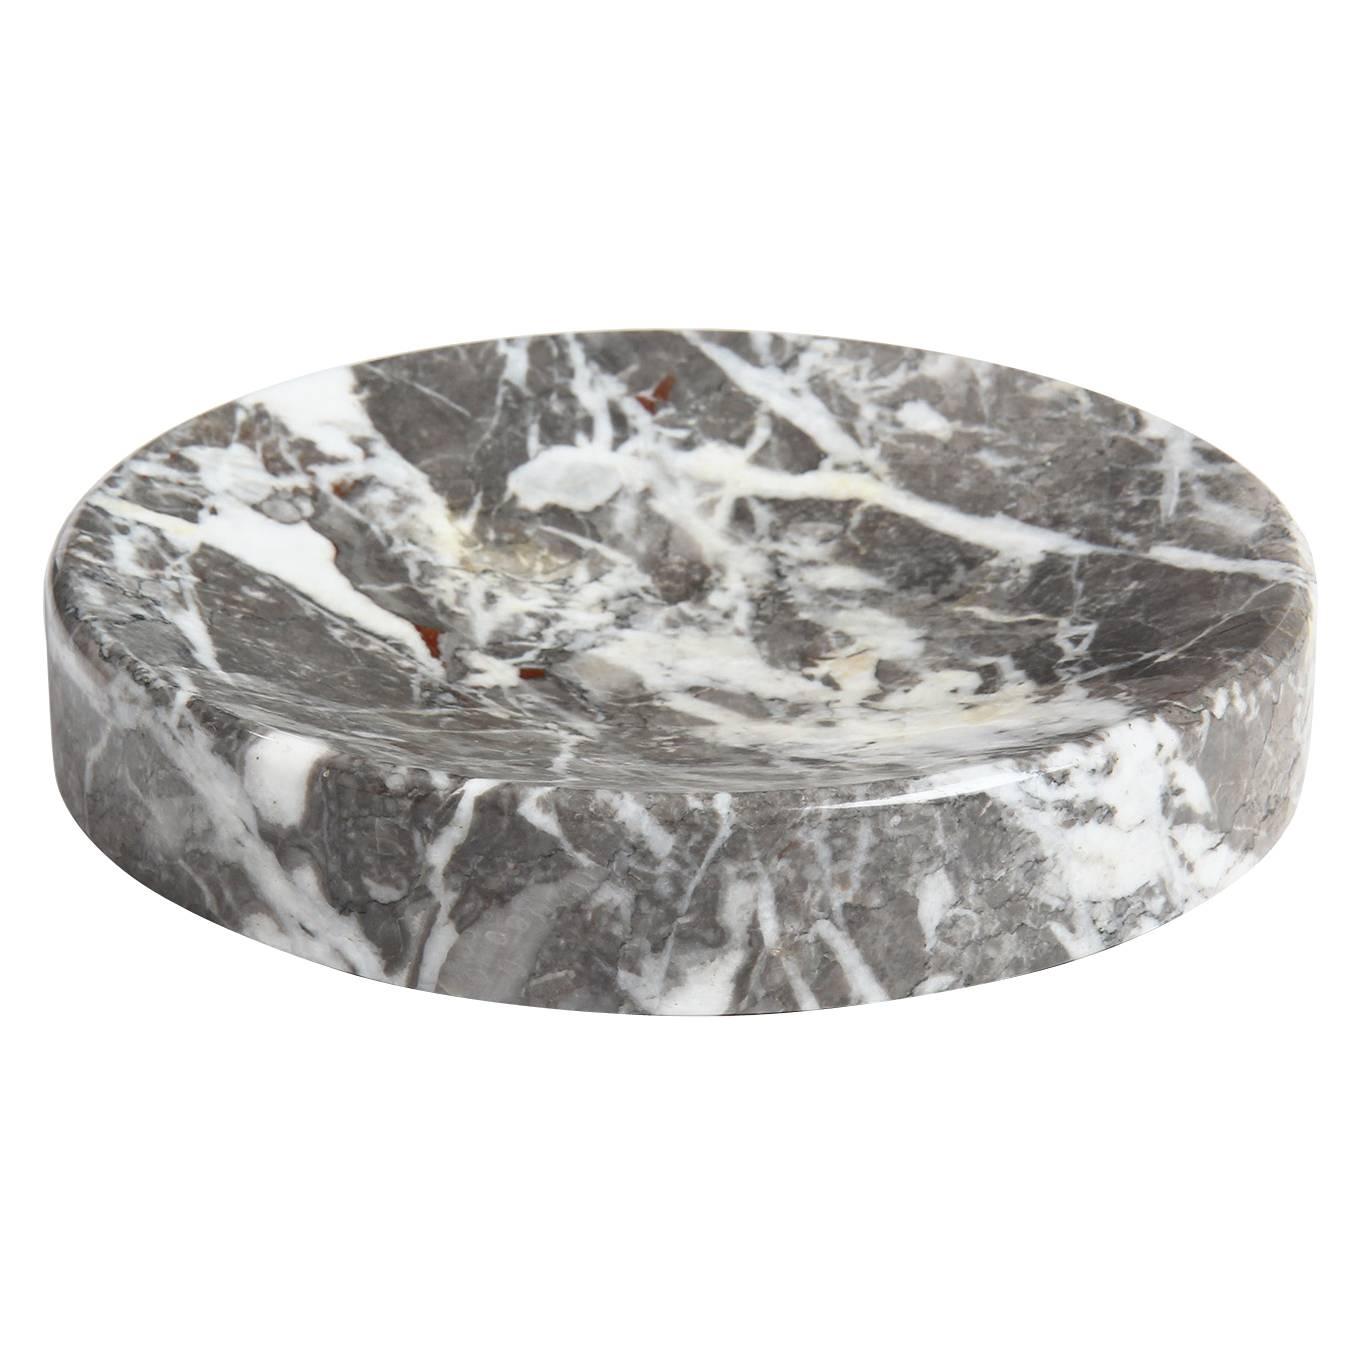 Shallow Convex Figured Marble Bowl